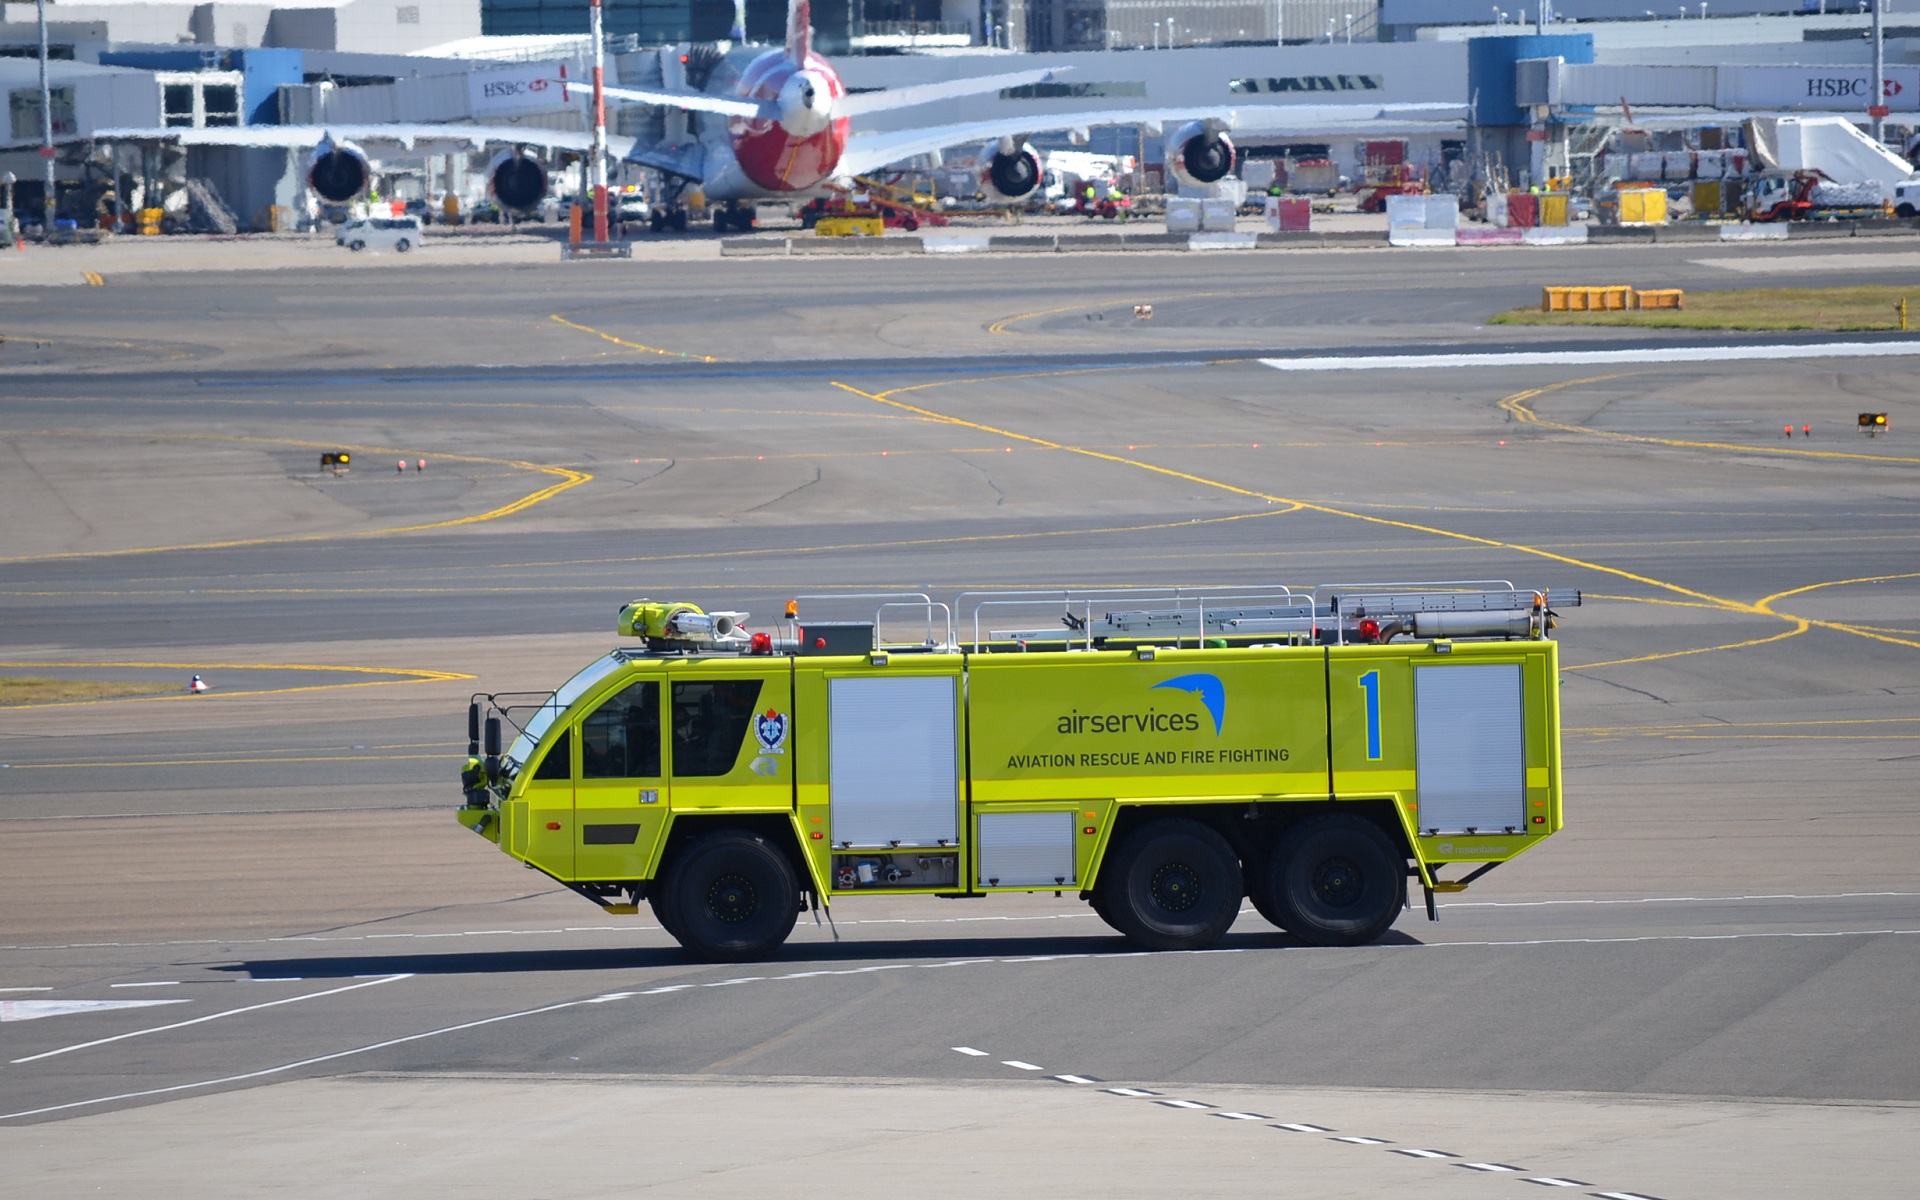 vehicles, airservices, airport, fire engine, fire truck